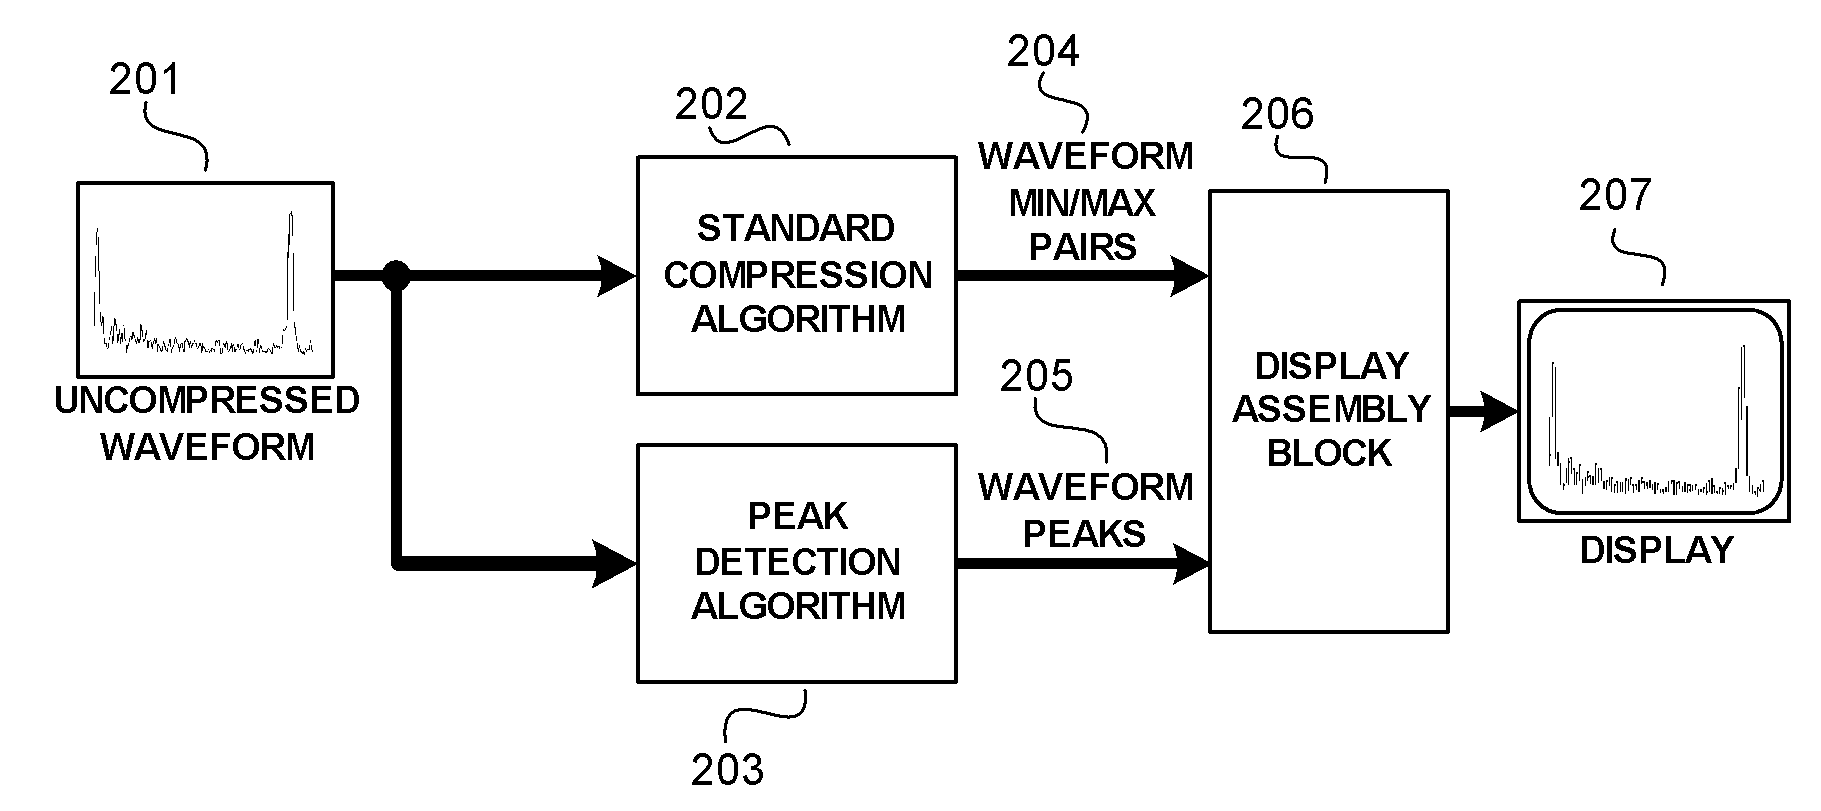 Peak visualization enhancement display system for use with a compressed waveform display on a non-destructive inspection instrument